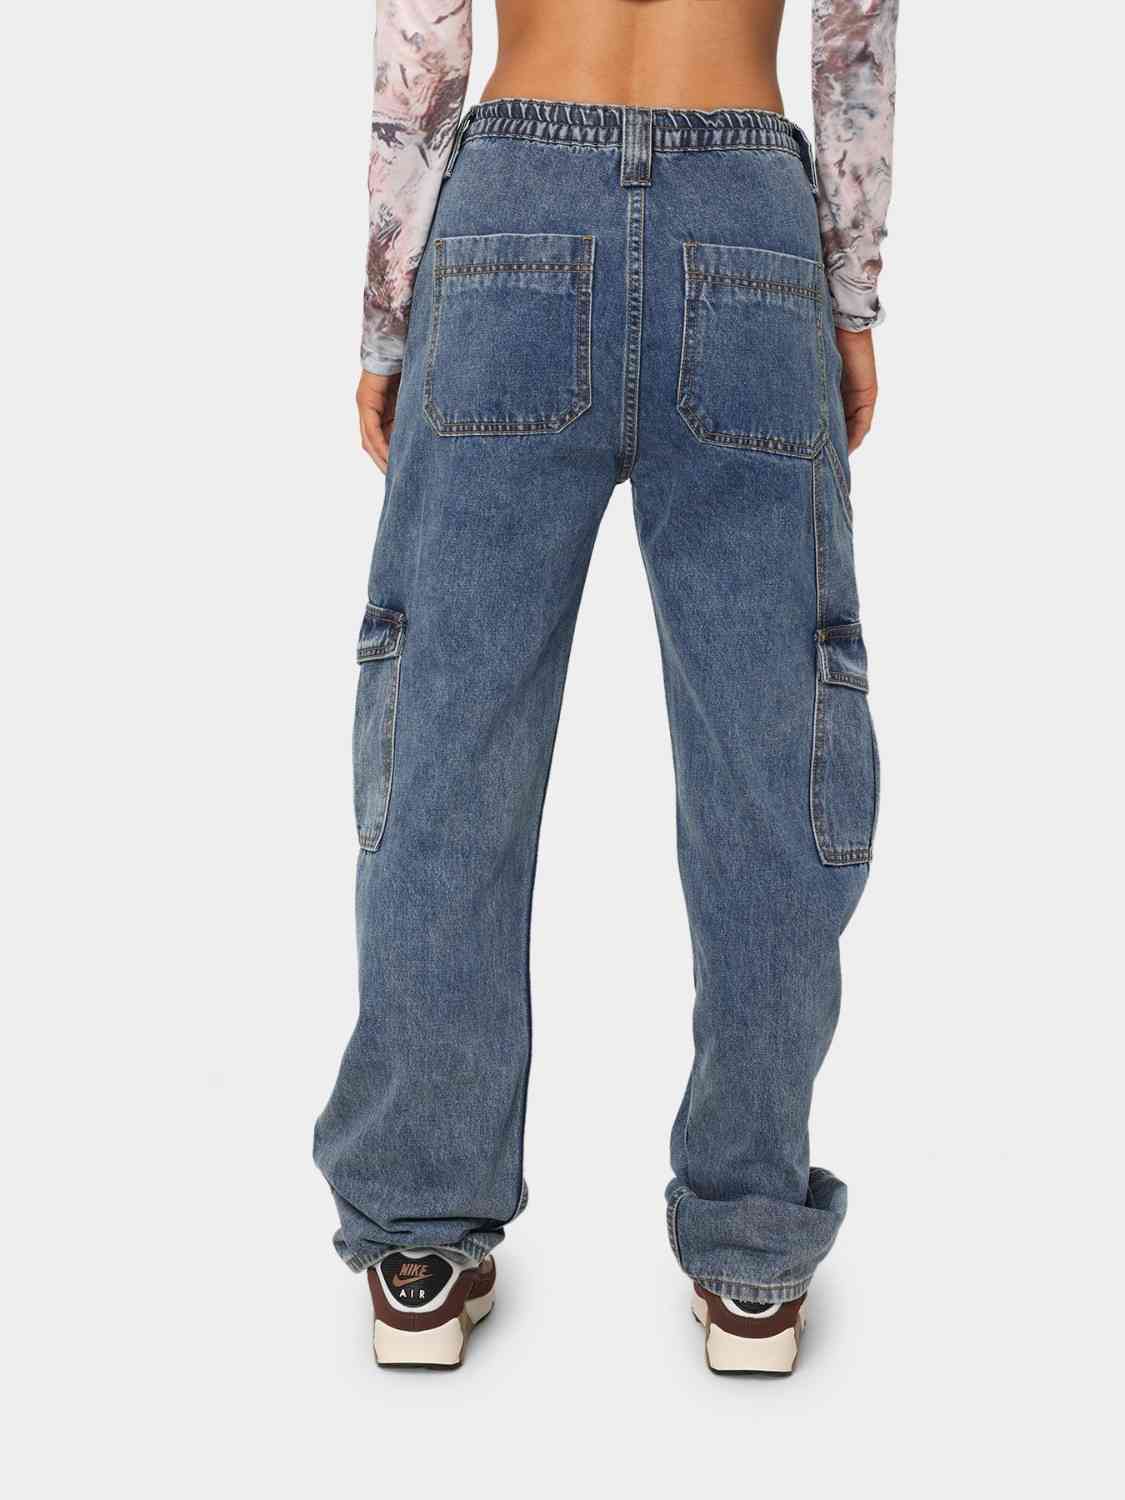 Dim Gray Straight Jeans with Pockets